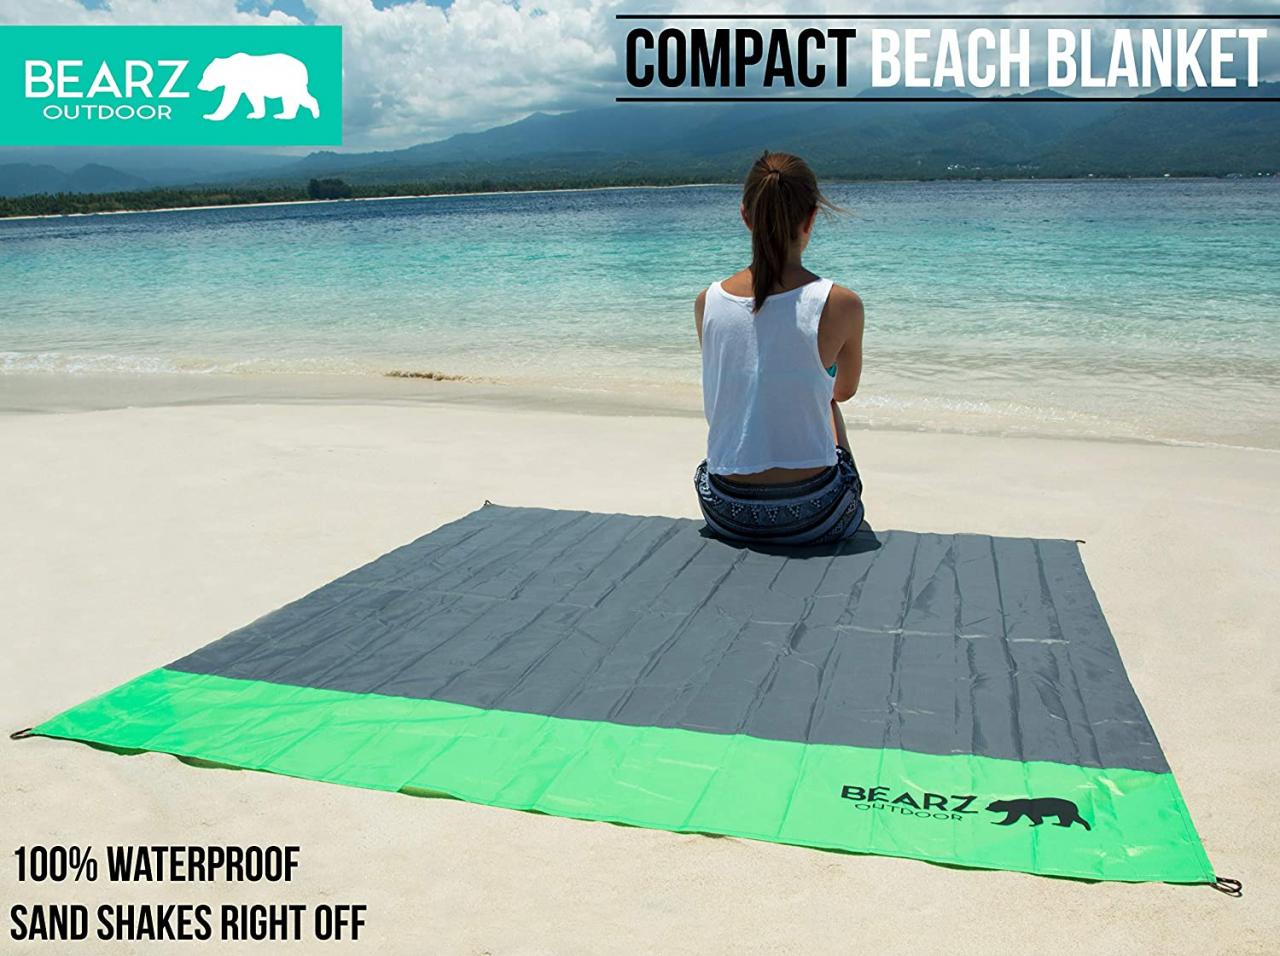 Festival & Camping Accessories BEARZ Outdoor Picnic Blanket & Camping Mat  Outdoor Rug Sand Proof Beach Blanket Picnic Blankets with Waterproof  Backing Camping Tarp Camping, Hiking & Mountaineering Sleeping Gear  umoonproductions.com